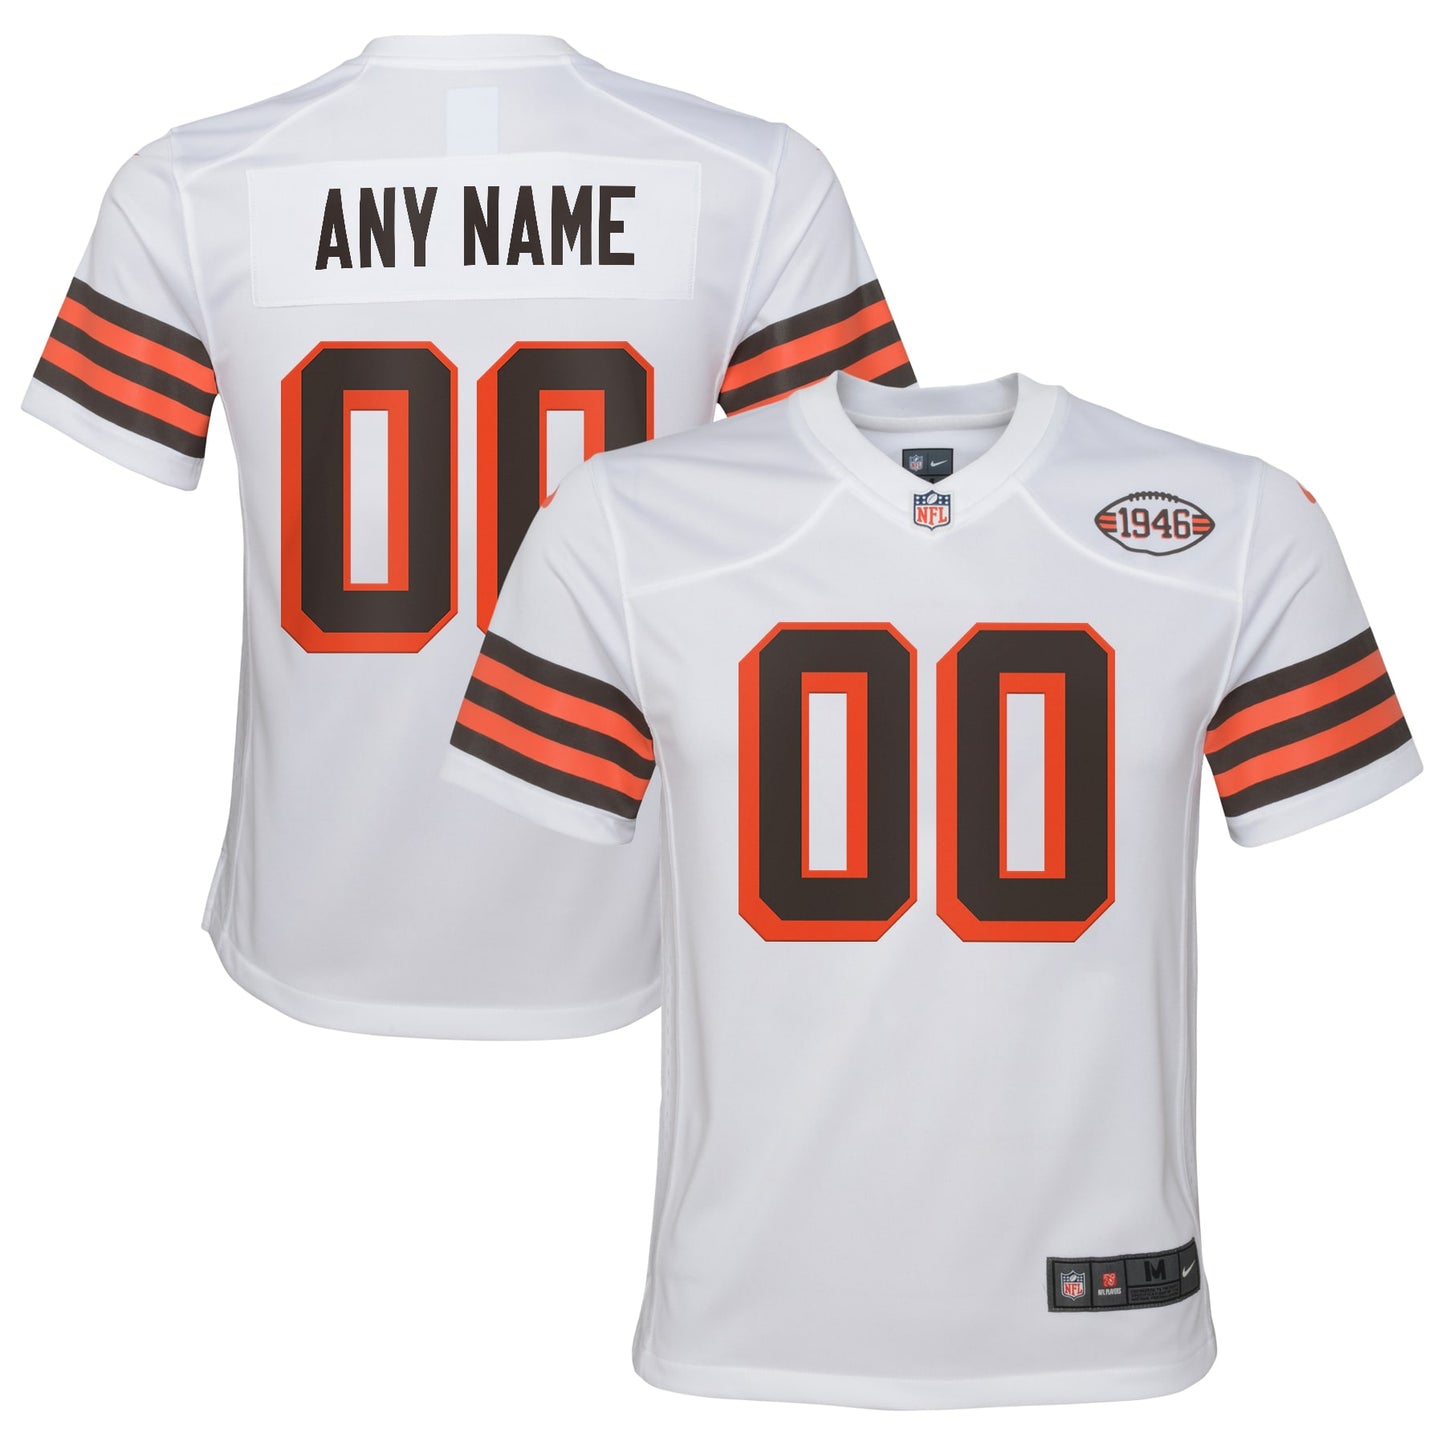 Cleveland Browns Nike Youth Alternate Custom Jersey - White